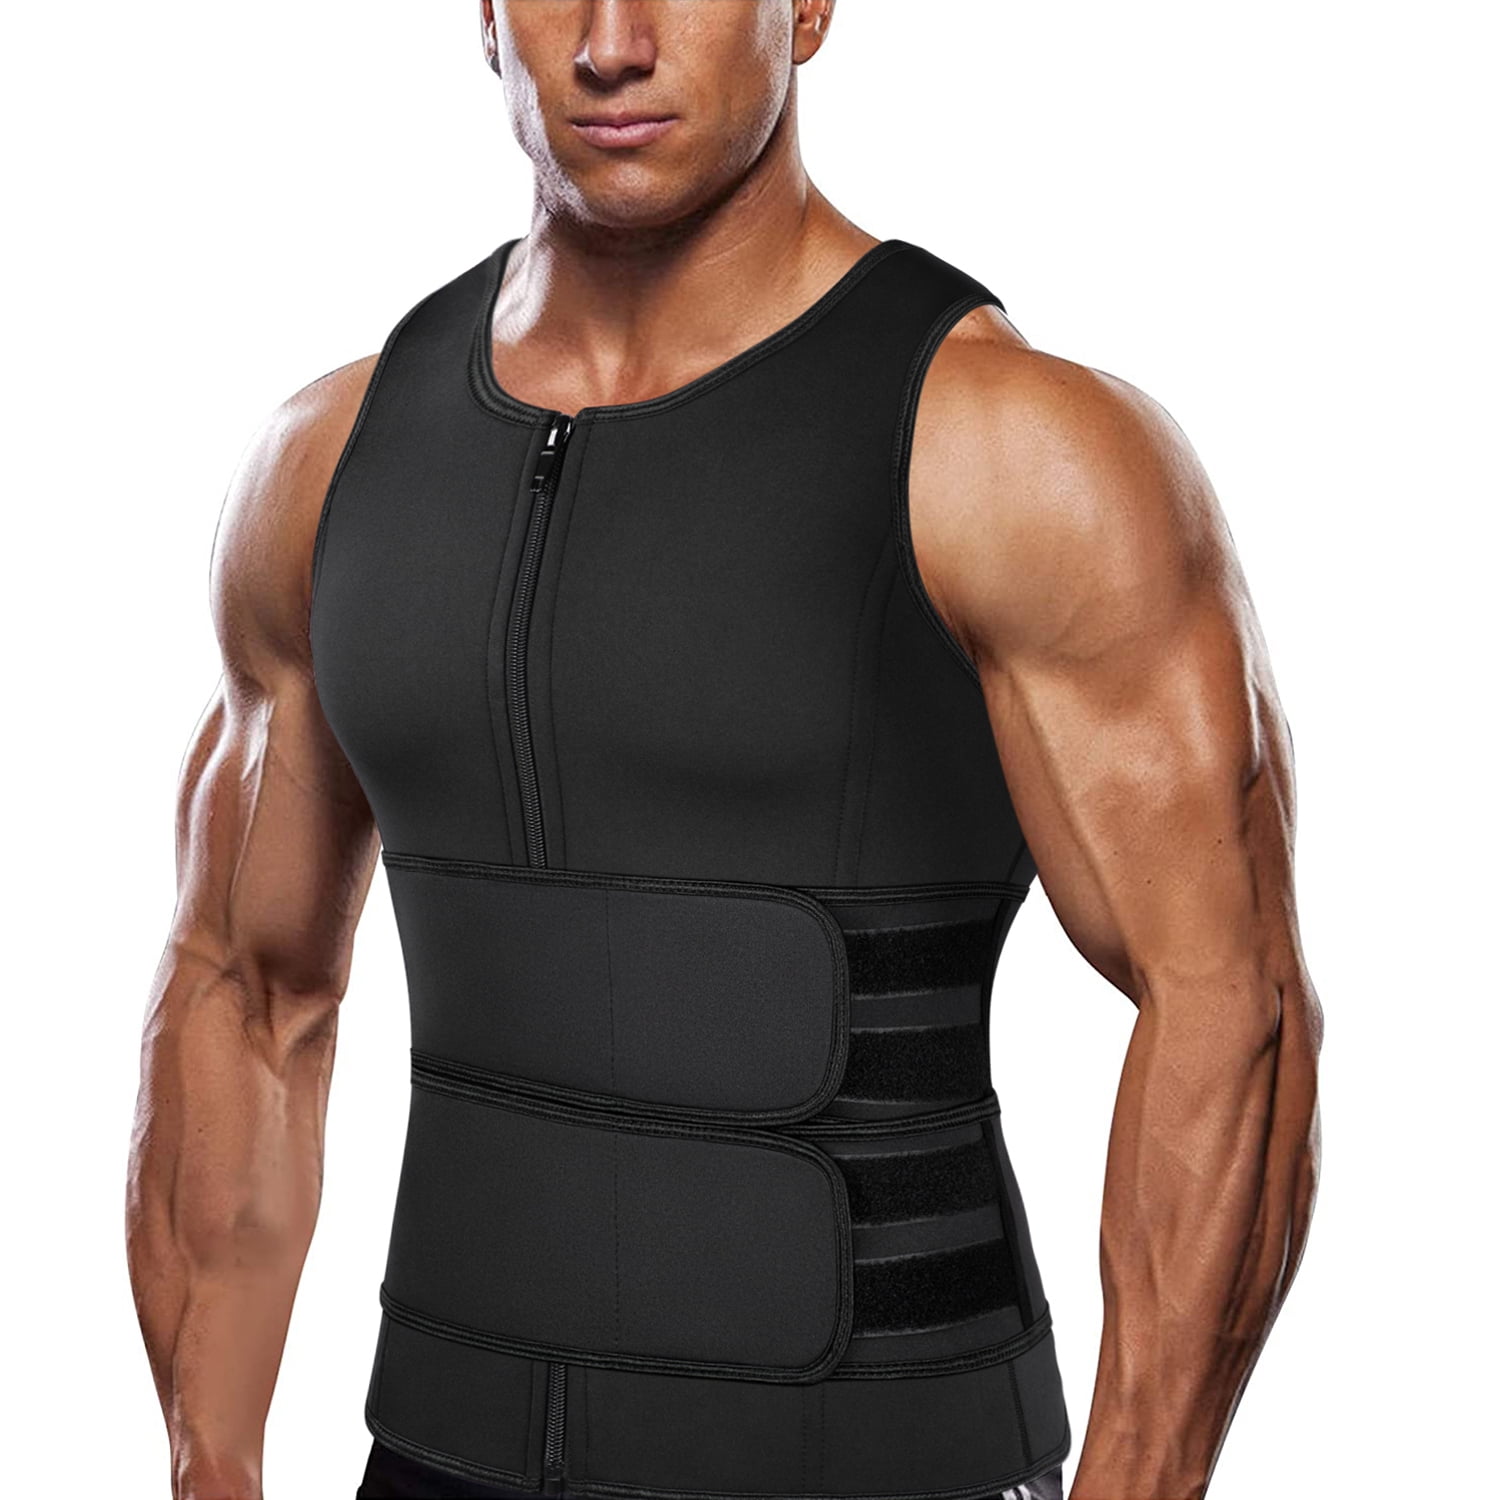 Men Compression Shirt Weight Loss Muscle T-Shirt Body Shaper Slimming Tank Tops 